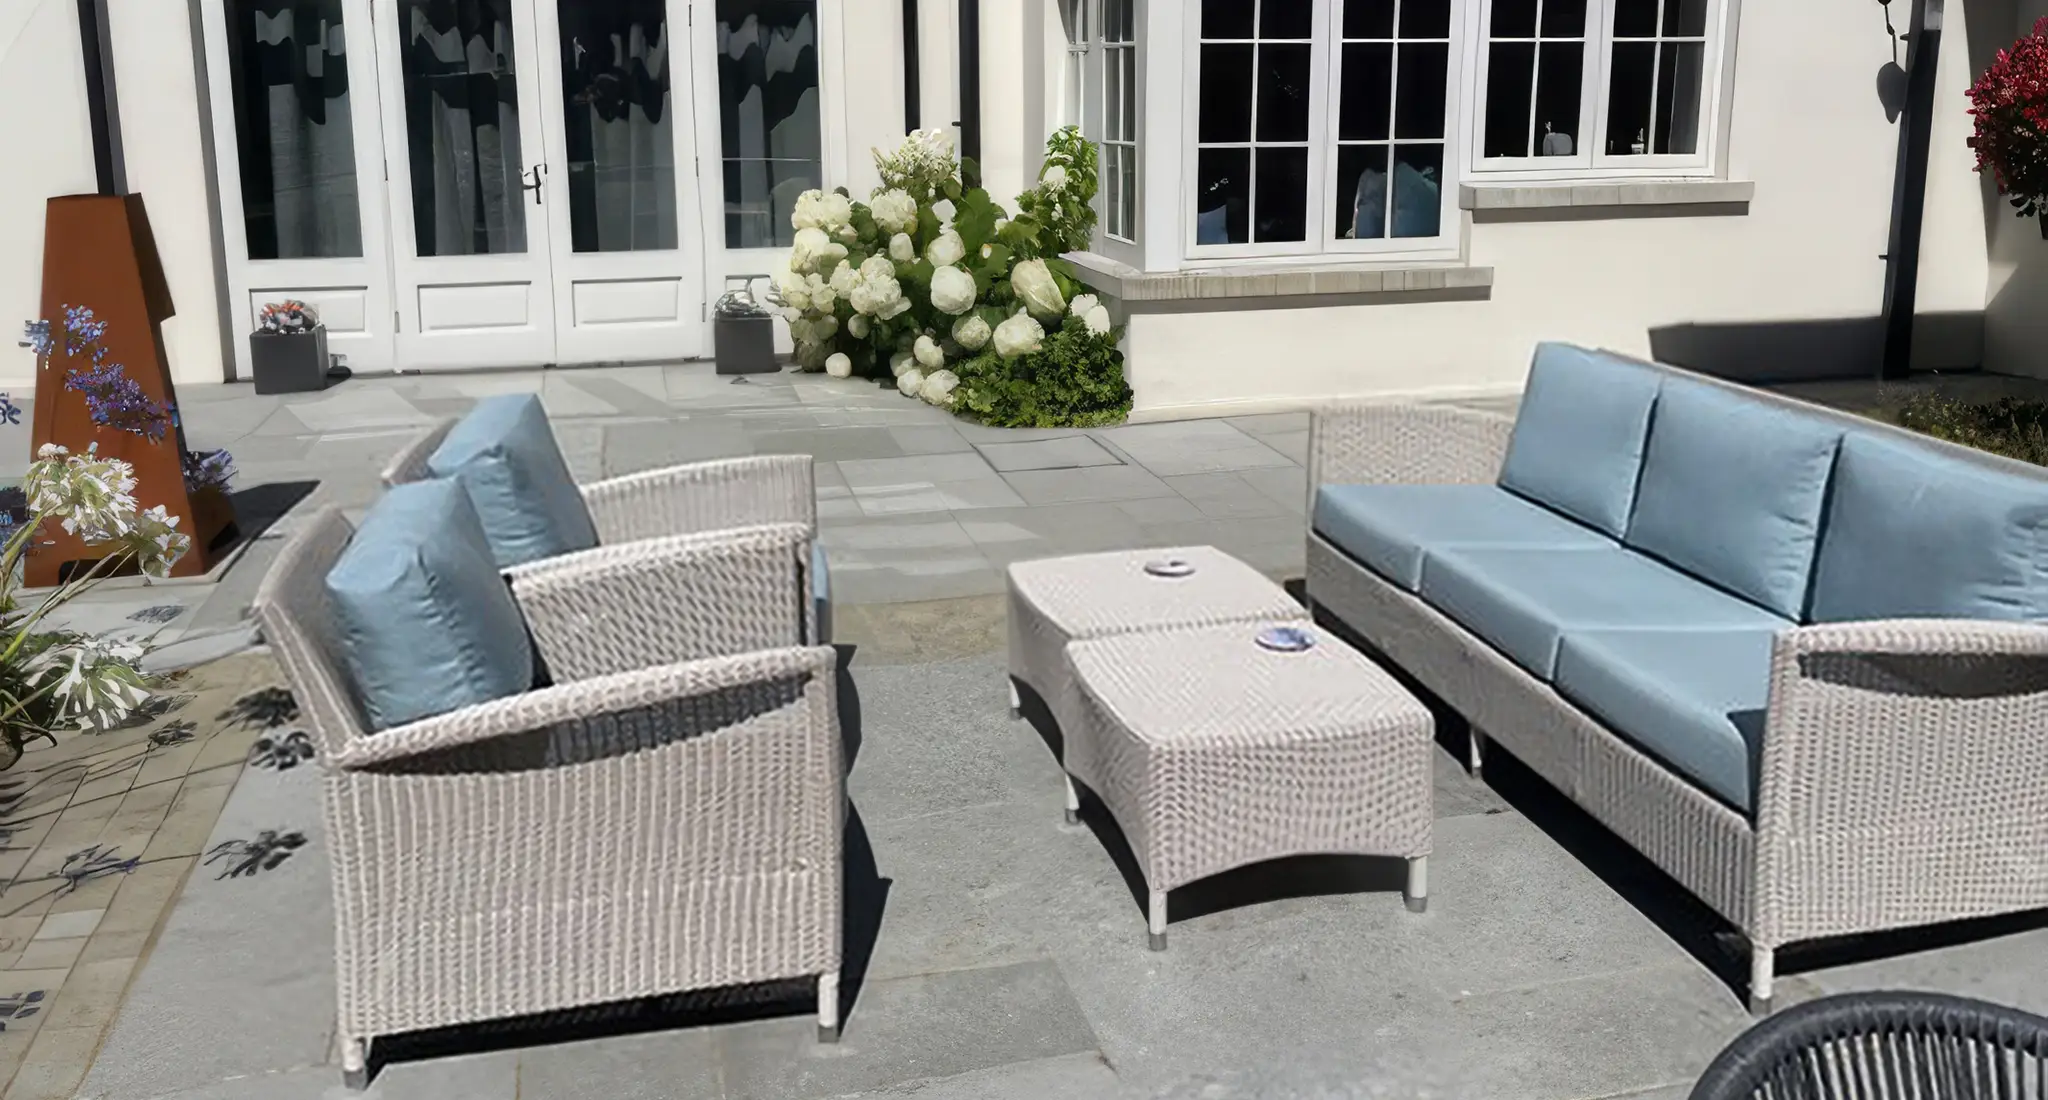 residential patio in northern ireland furnished with wicker furniture and coffee tables for outdoor relaxation.